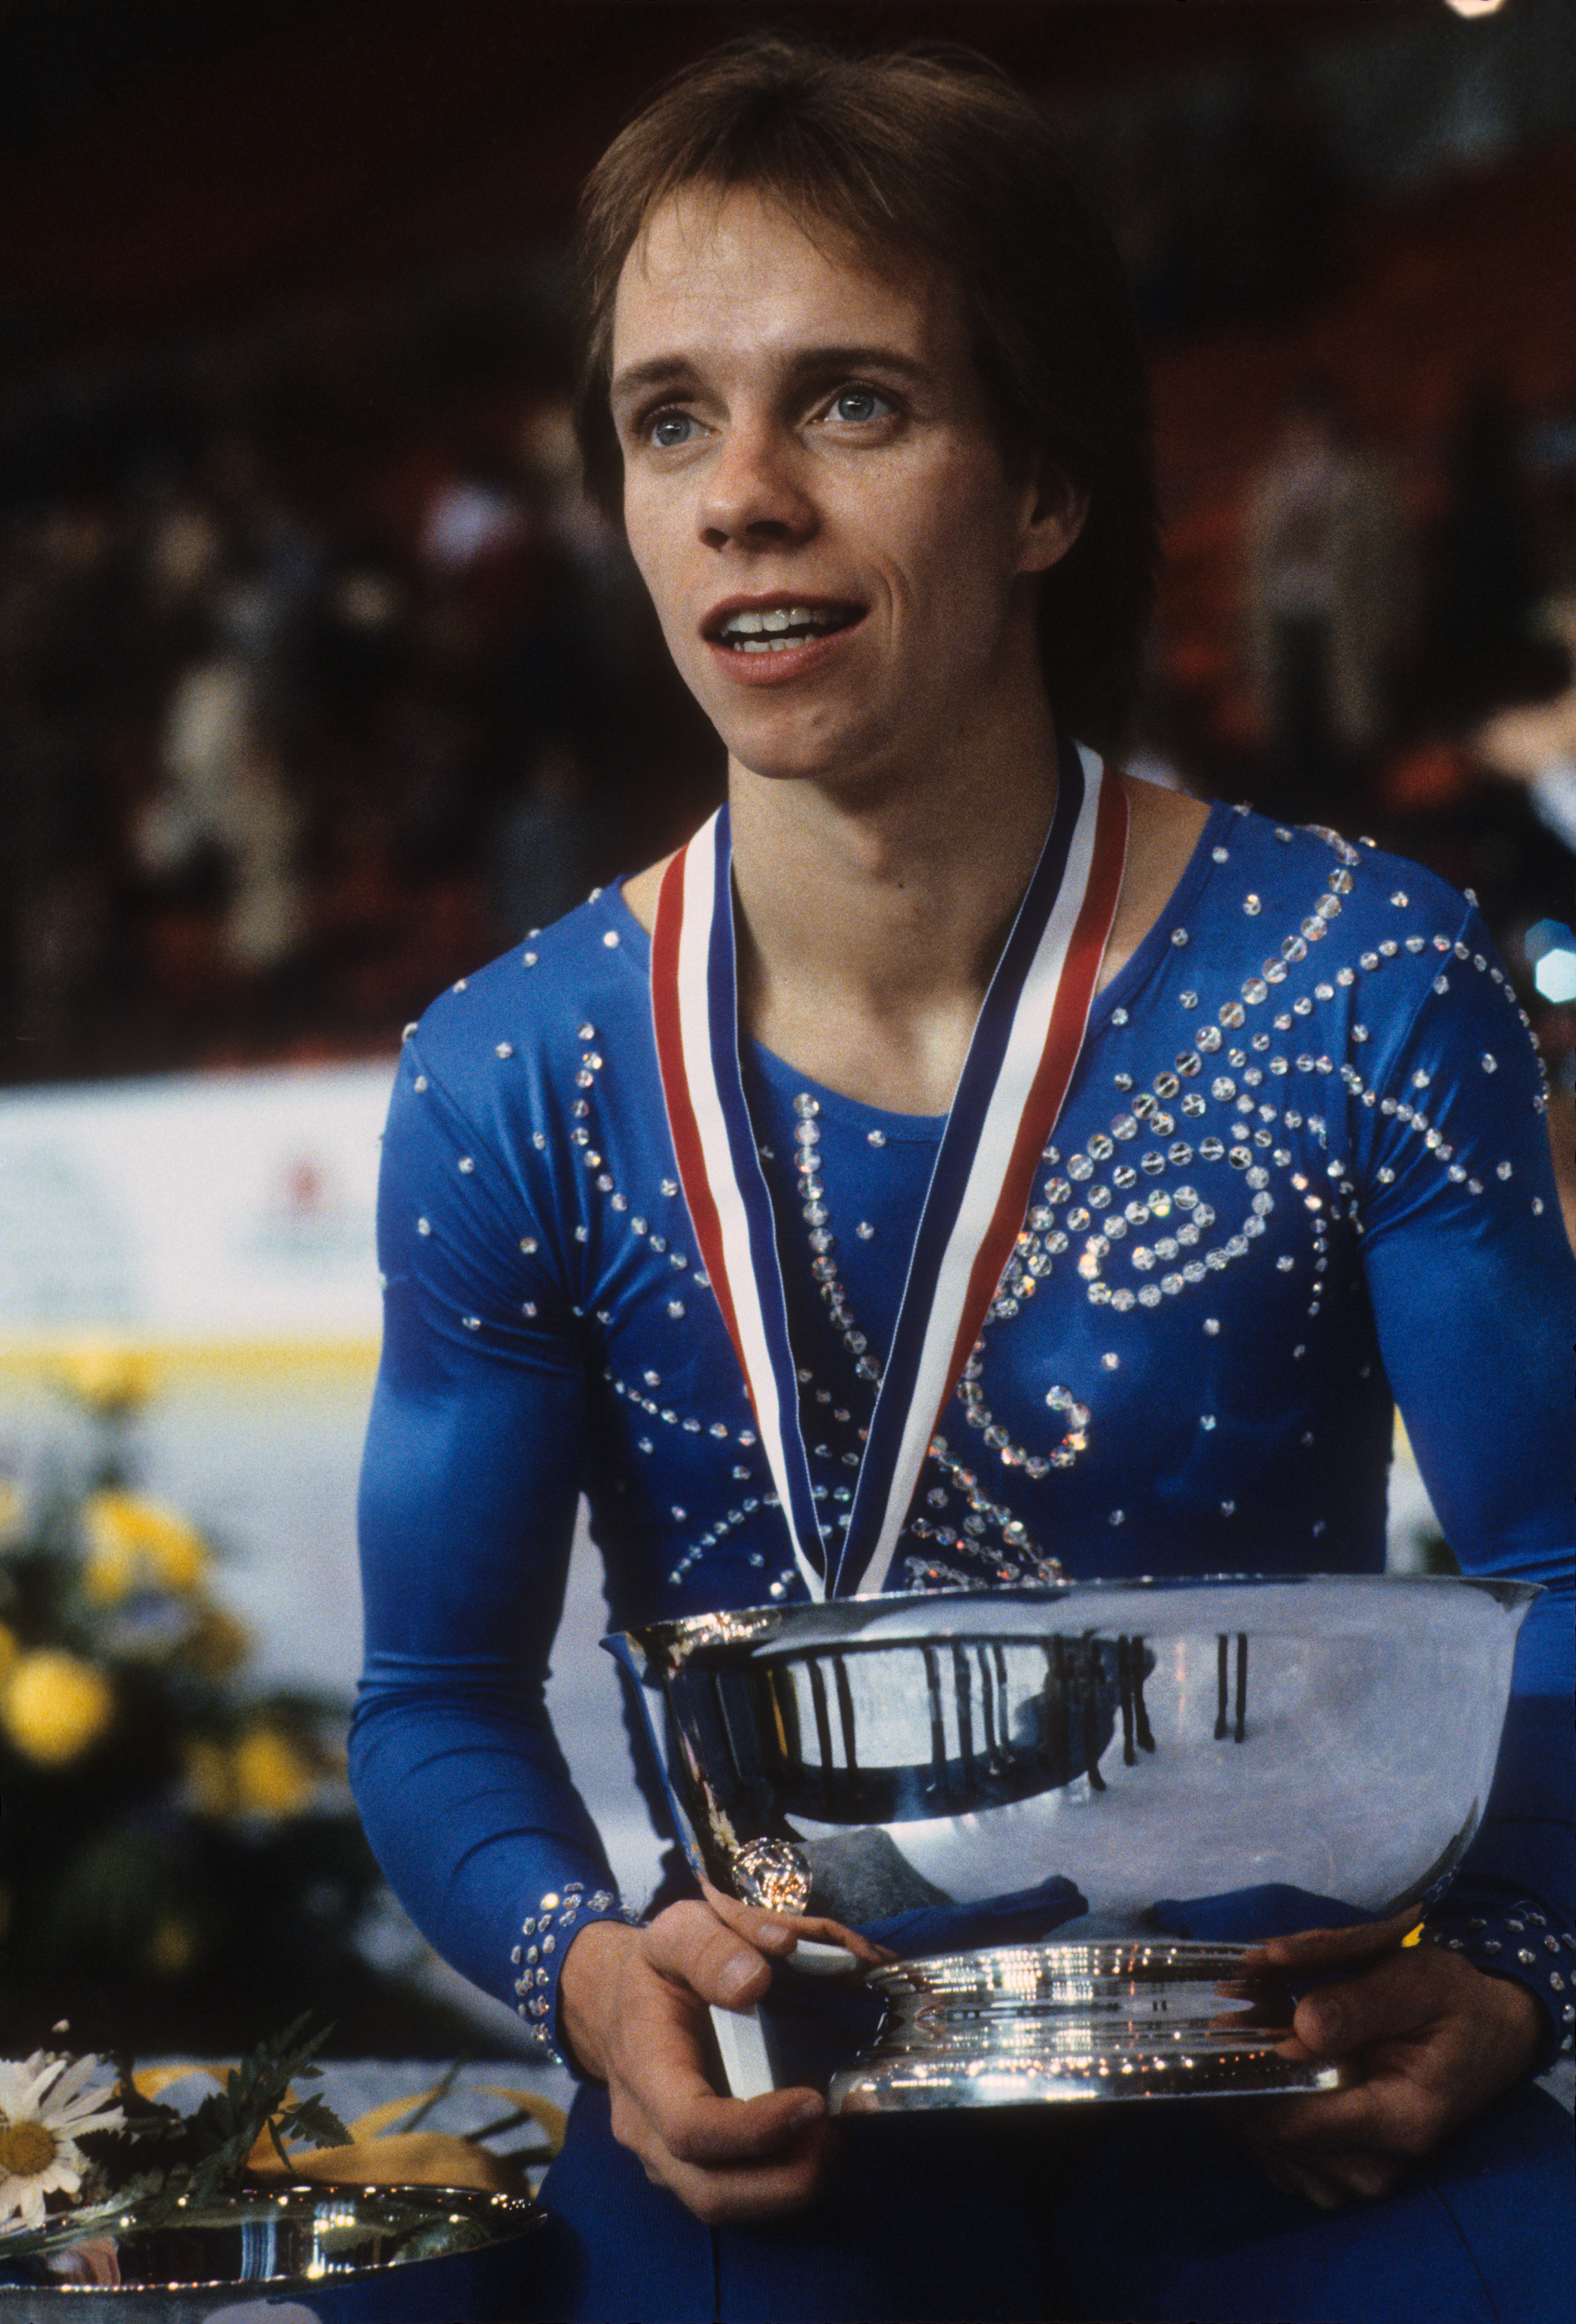 Scott Hamilton after winning Men's Singles competition at Pittsburgh Civic Arena on February 4, 1983 | Source: Getty Images